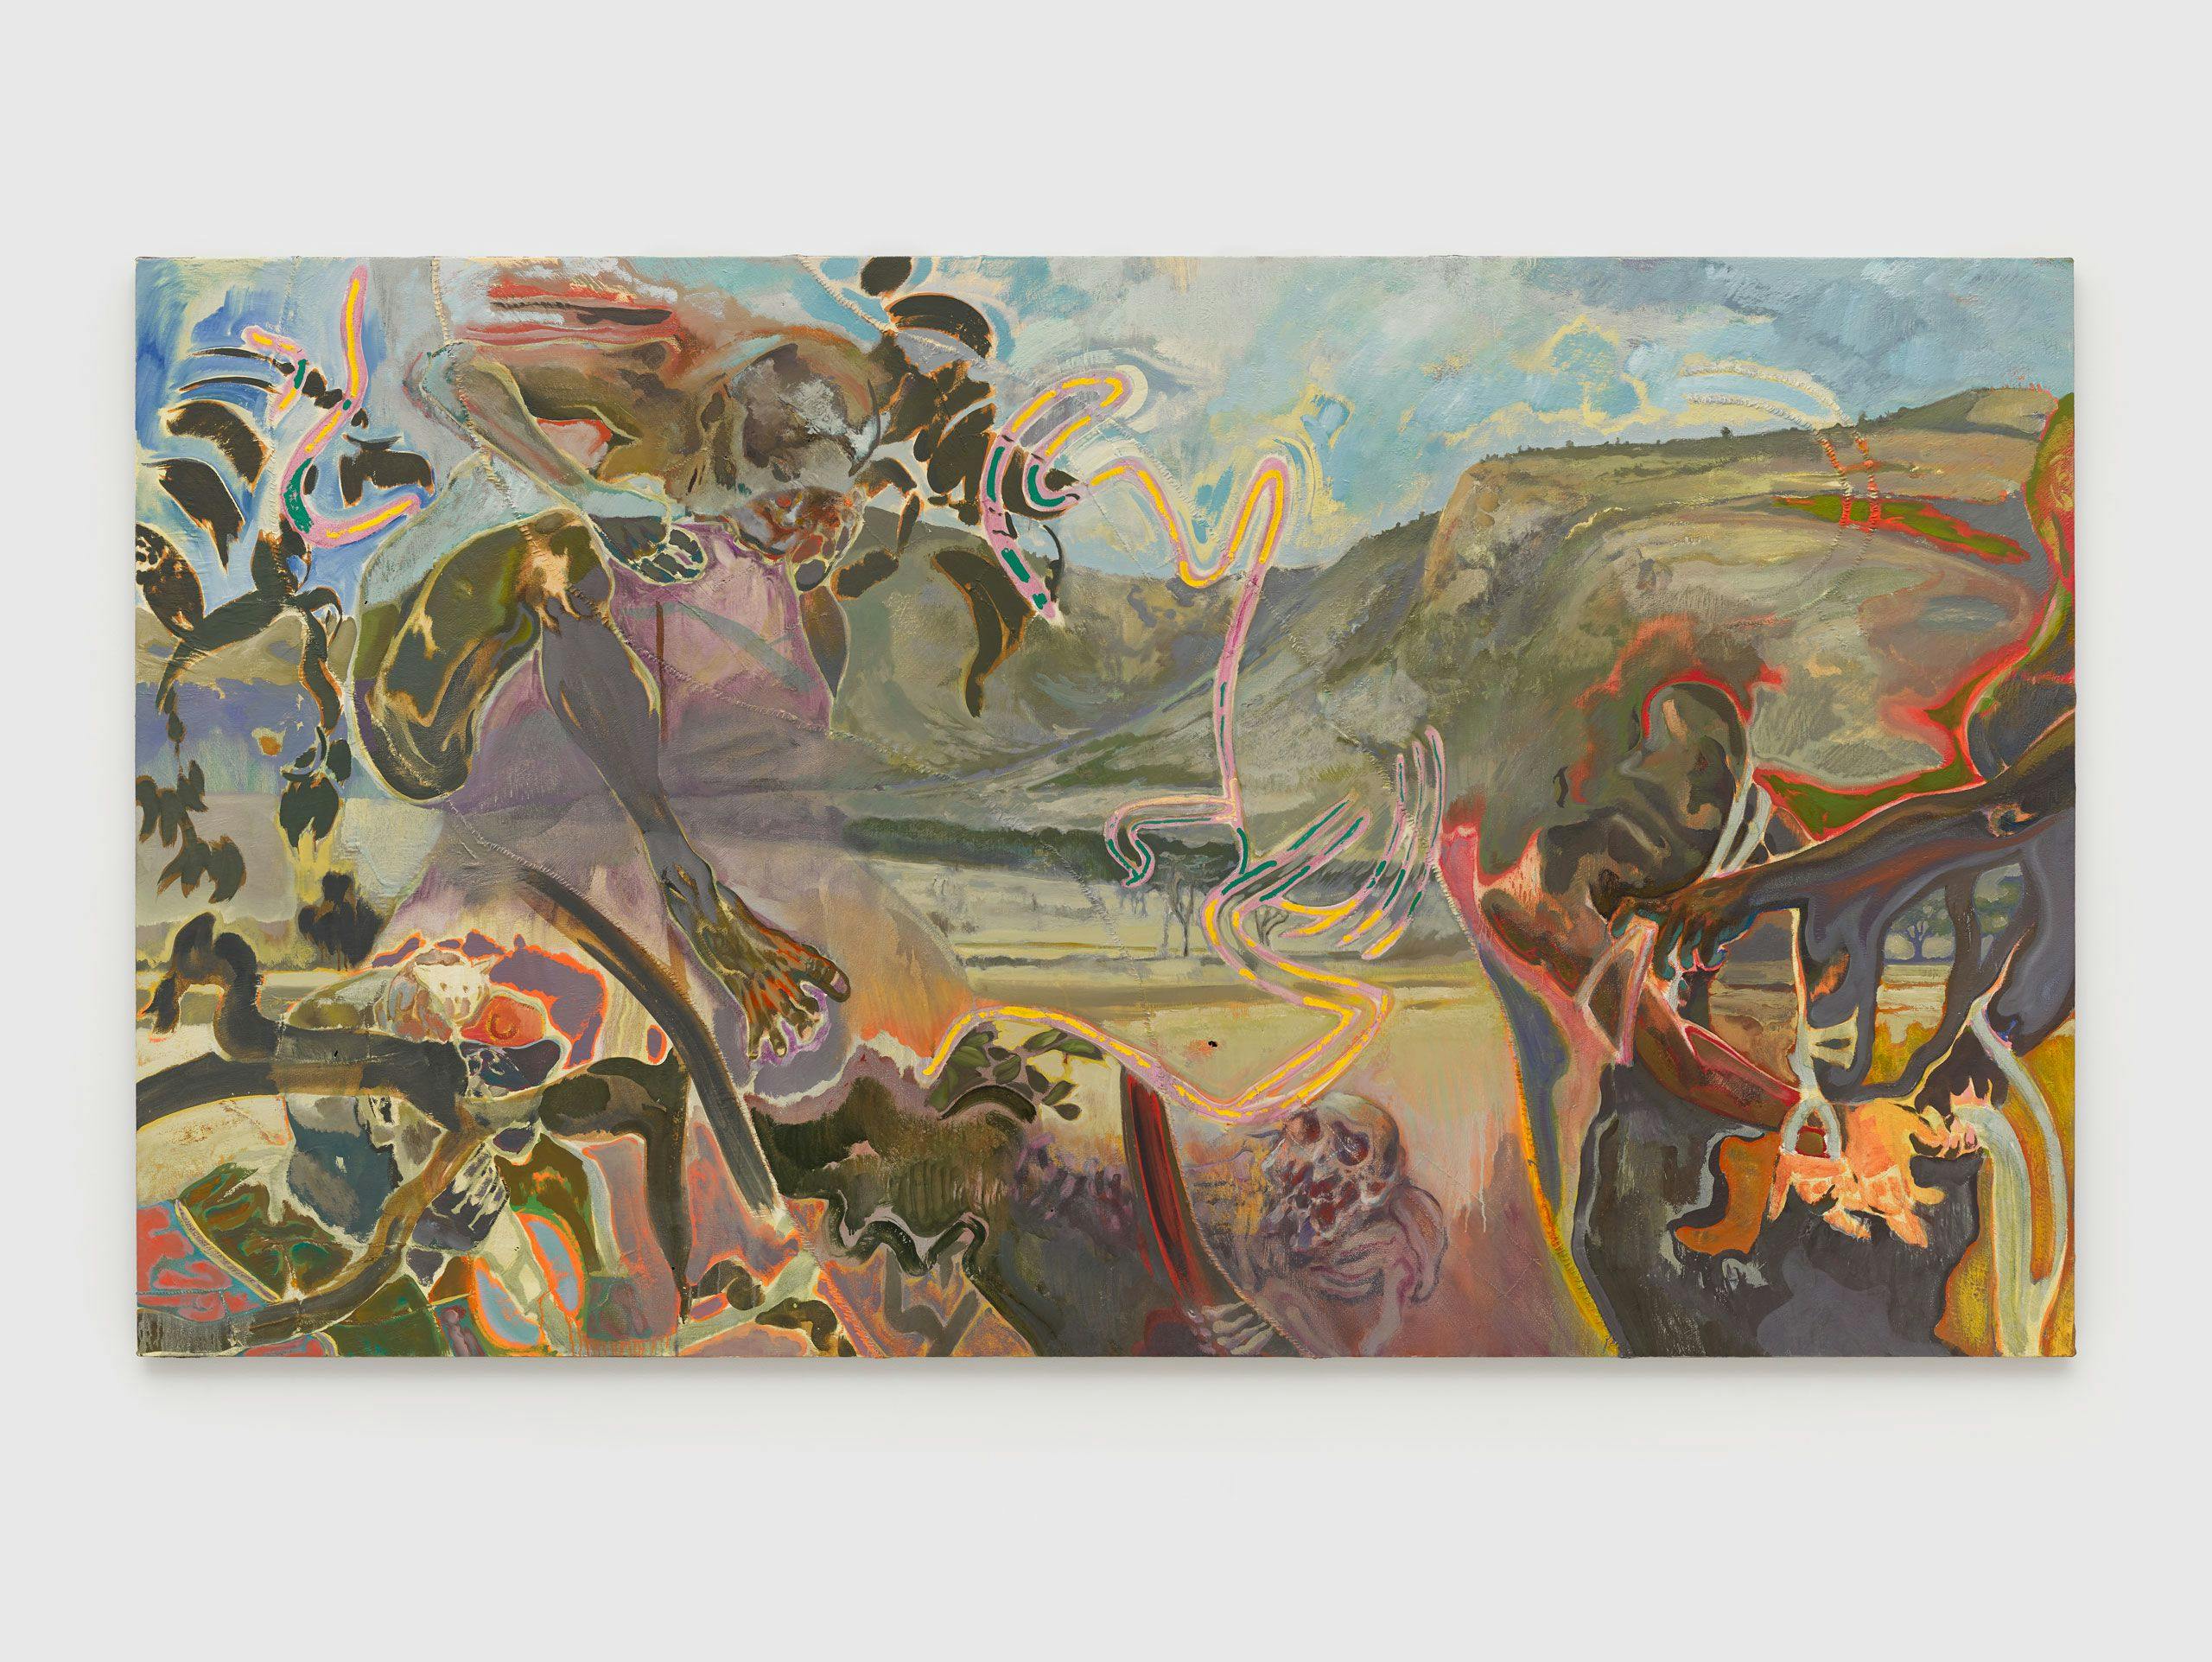 A painting by Michael Armitage, titled Enasoit, dated 2019.